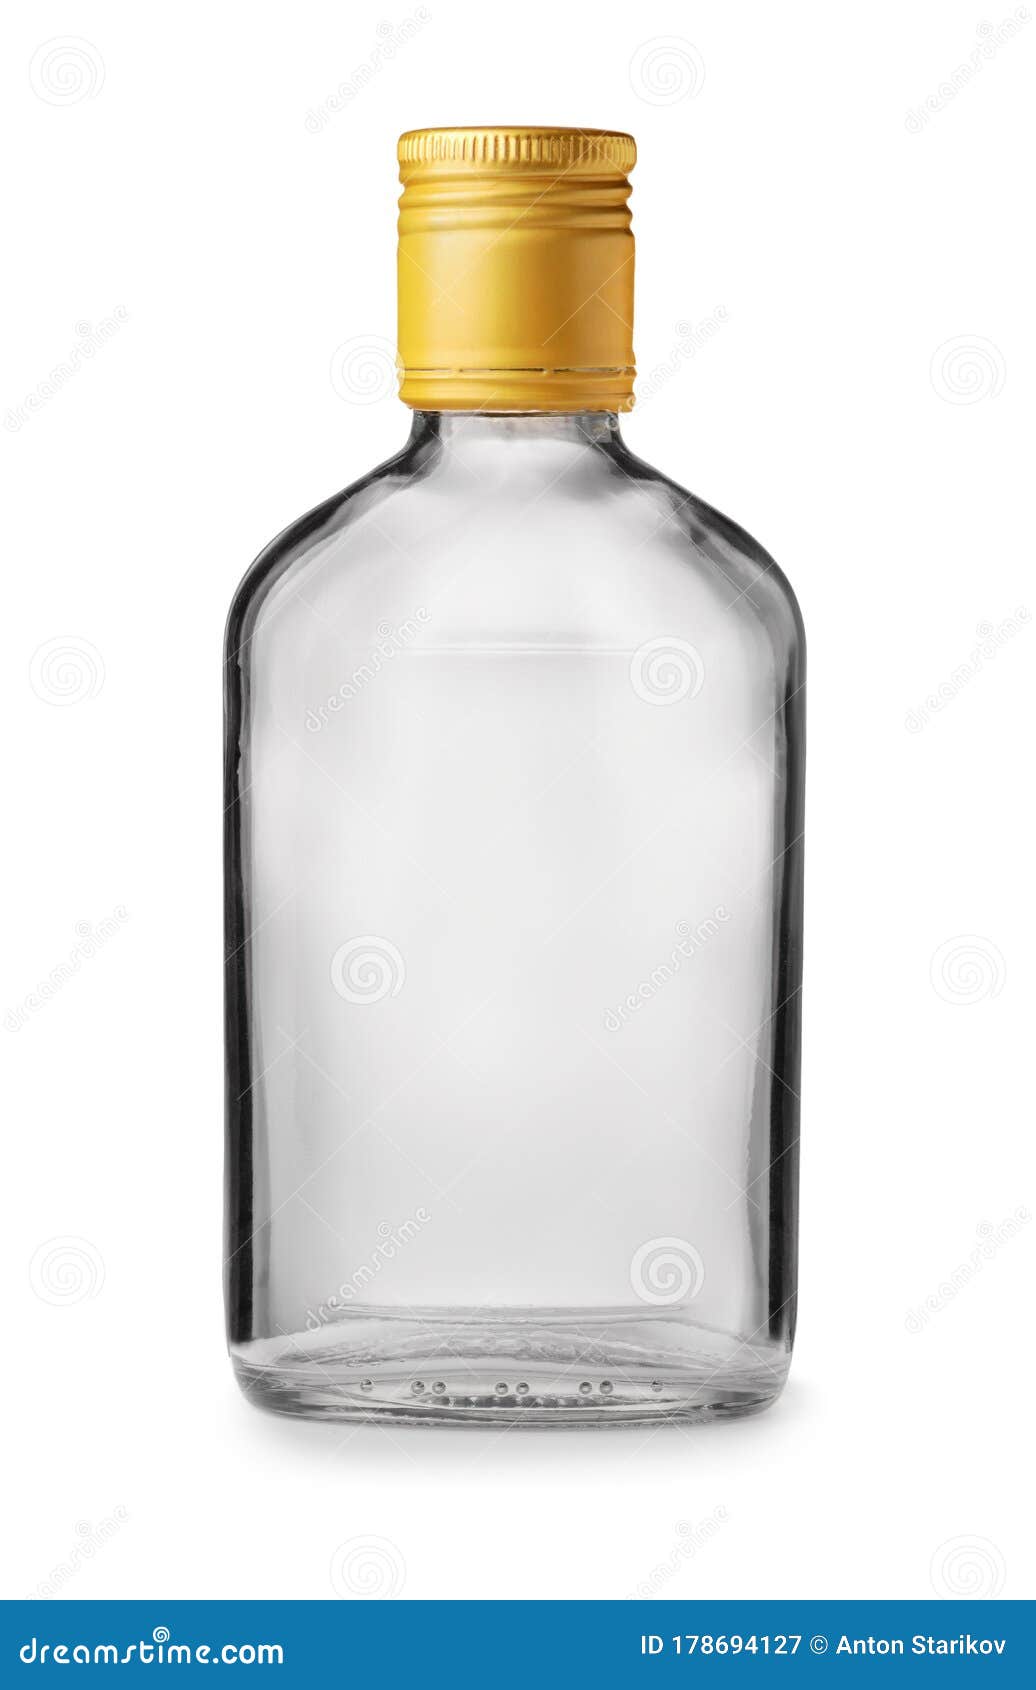 Download Front View Of Clear Glass Alcohol Flask Stock Image Image Of Bottle Mockup 178694127